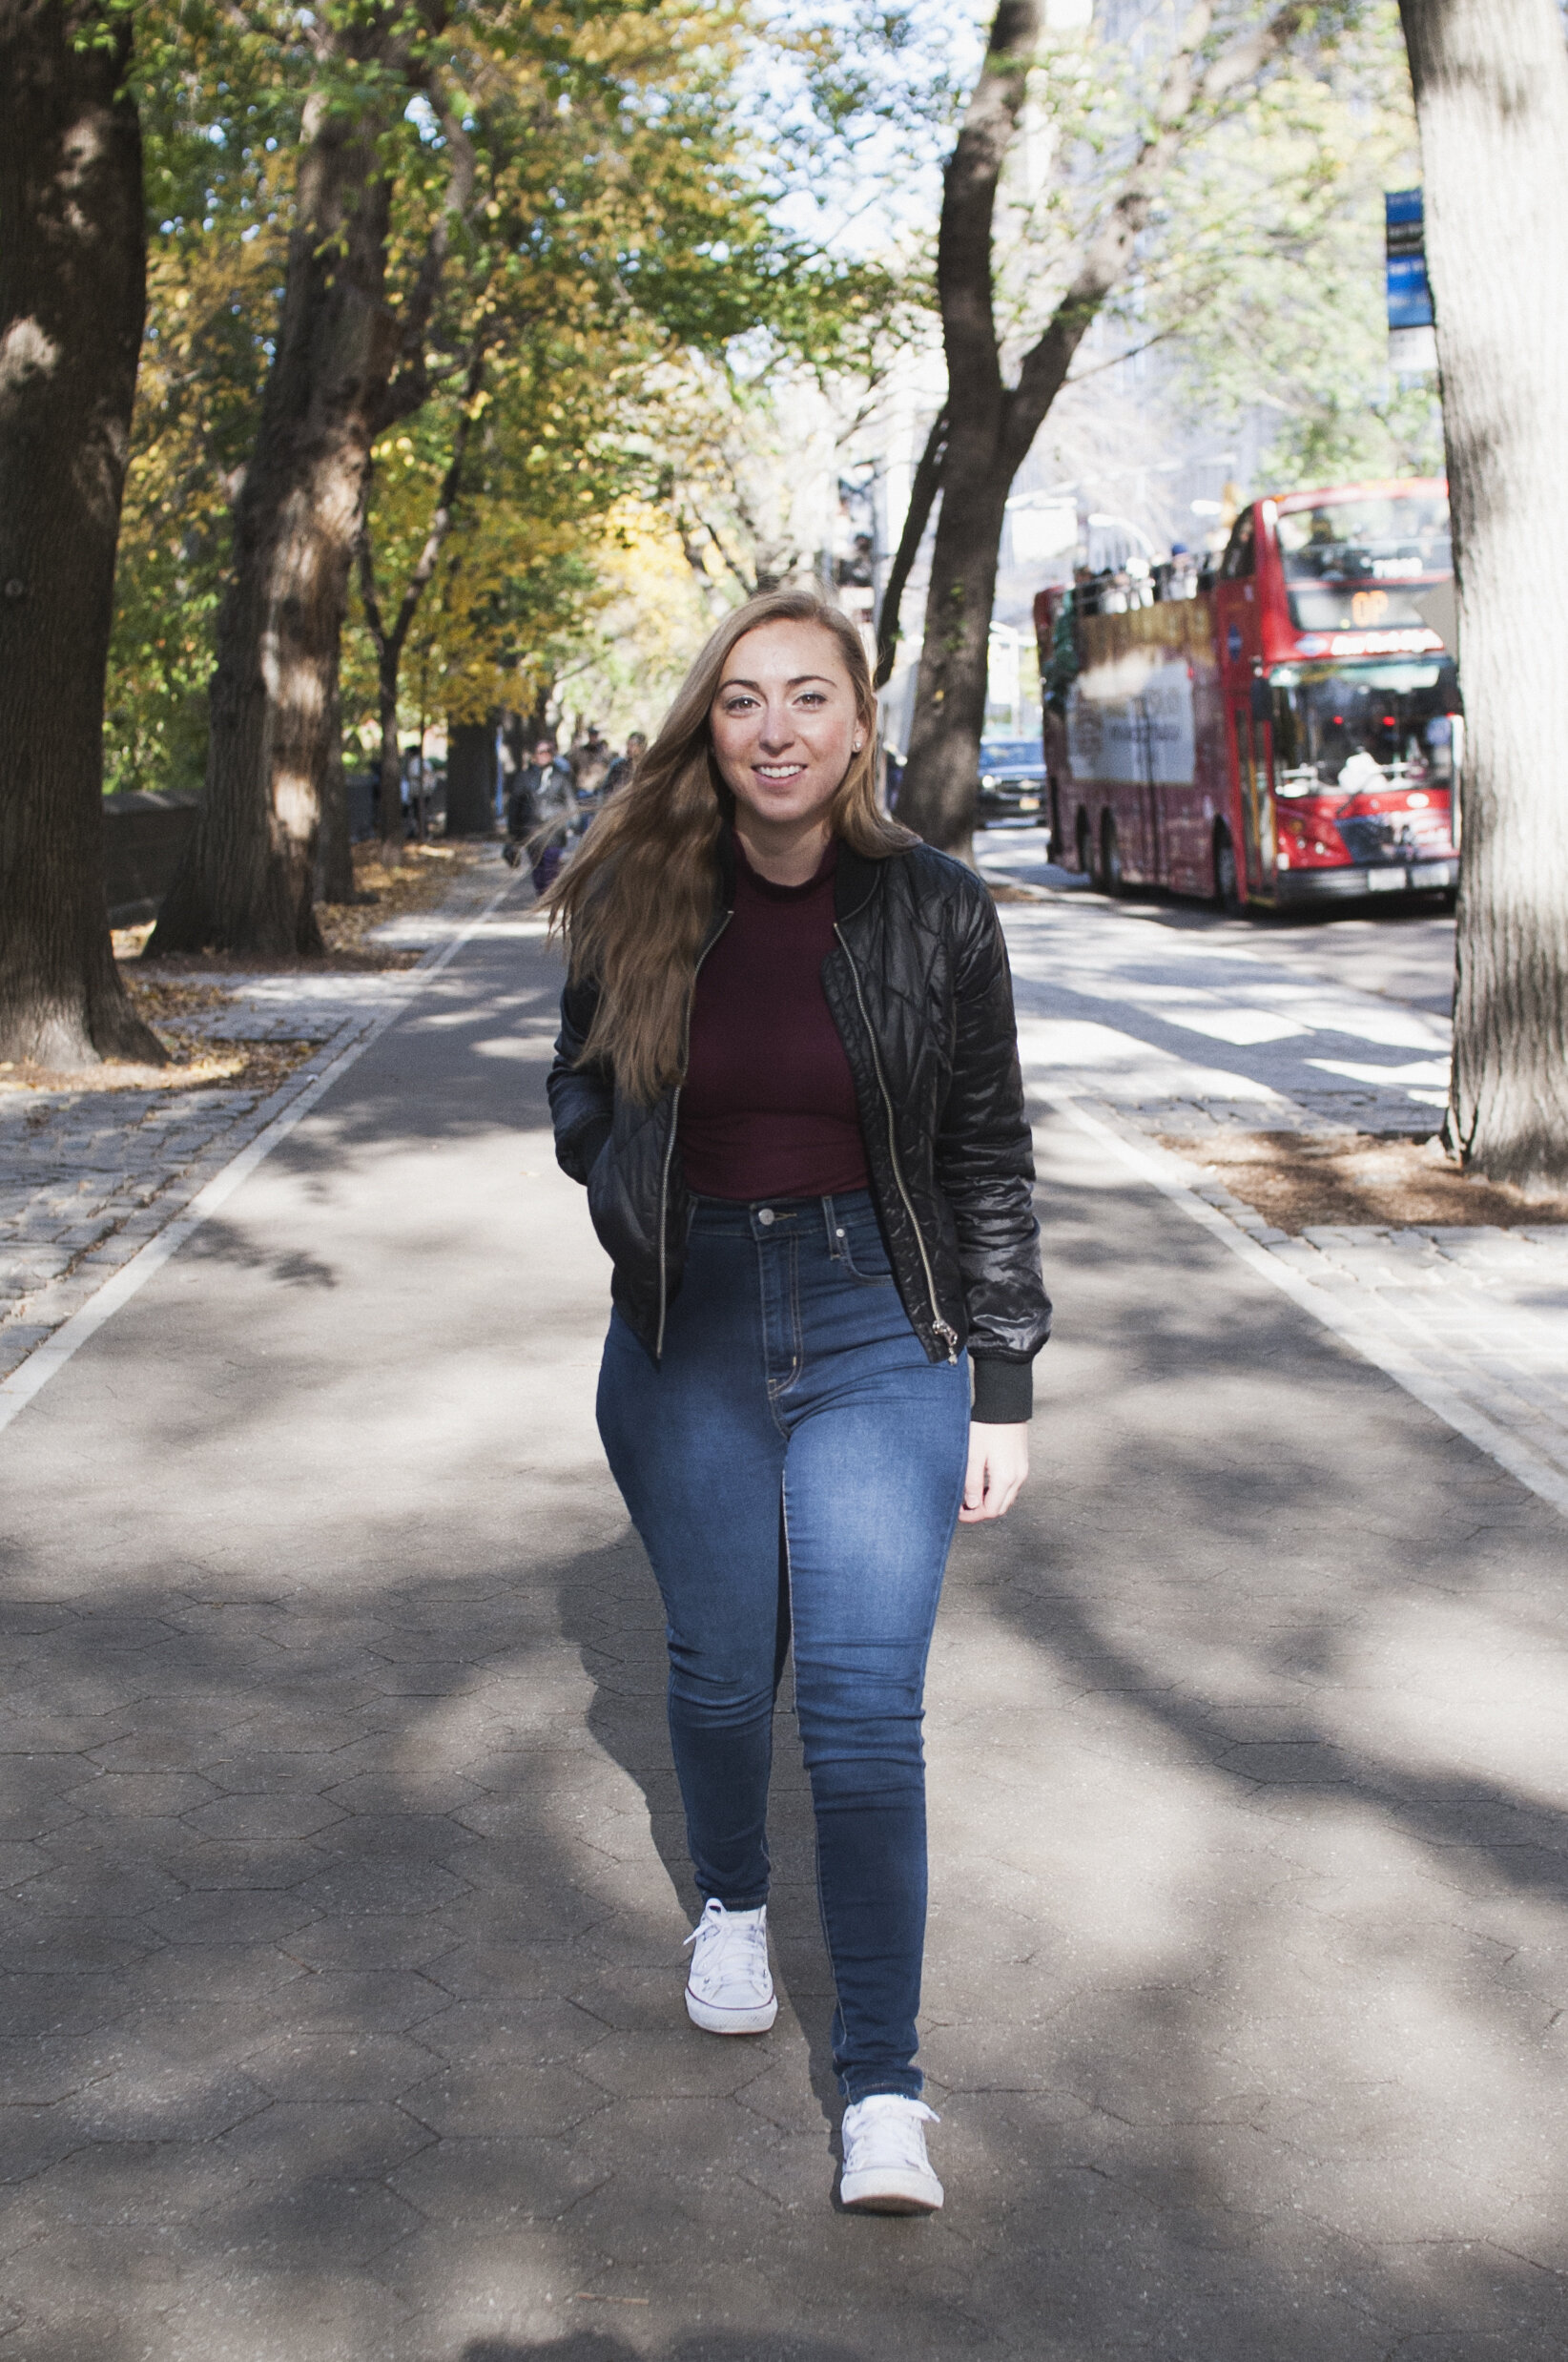 levi's curvy skinny jeans review